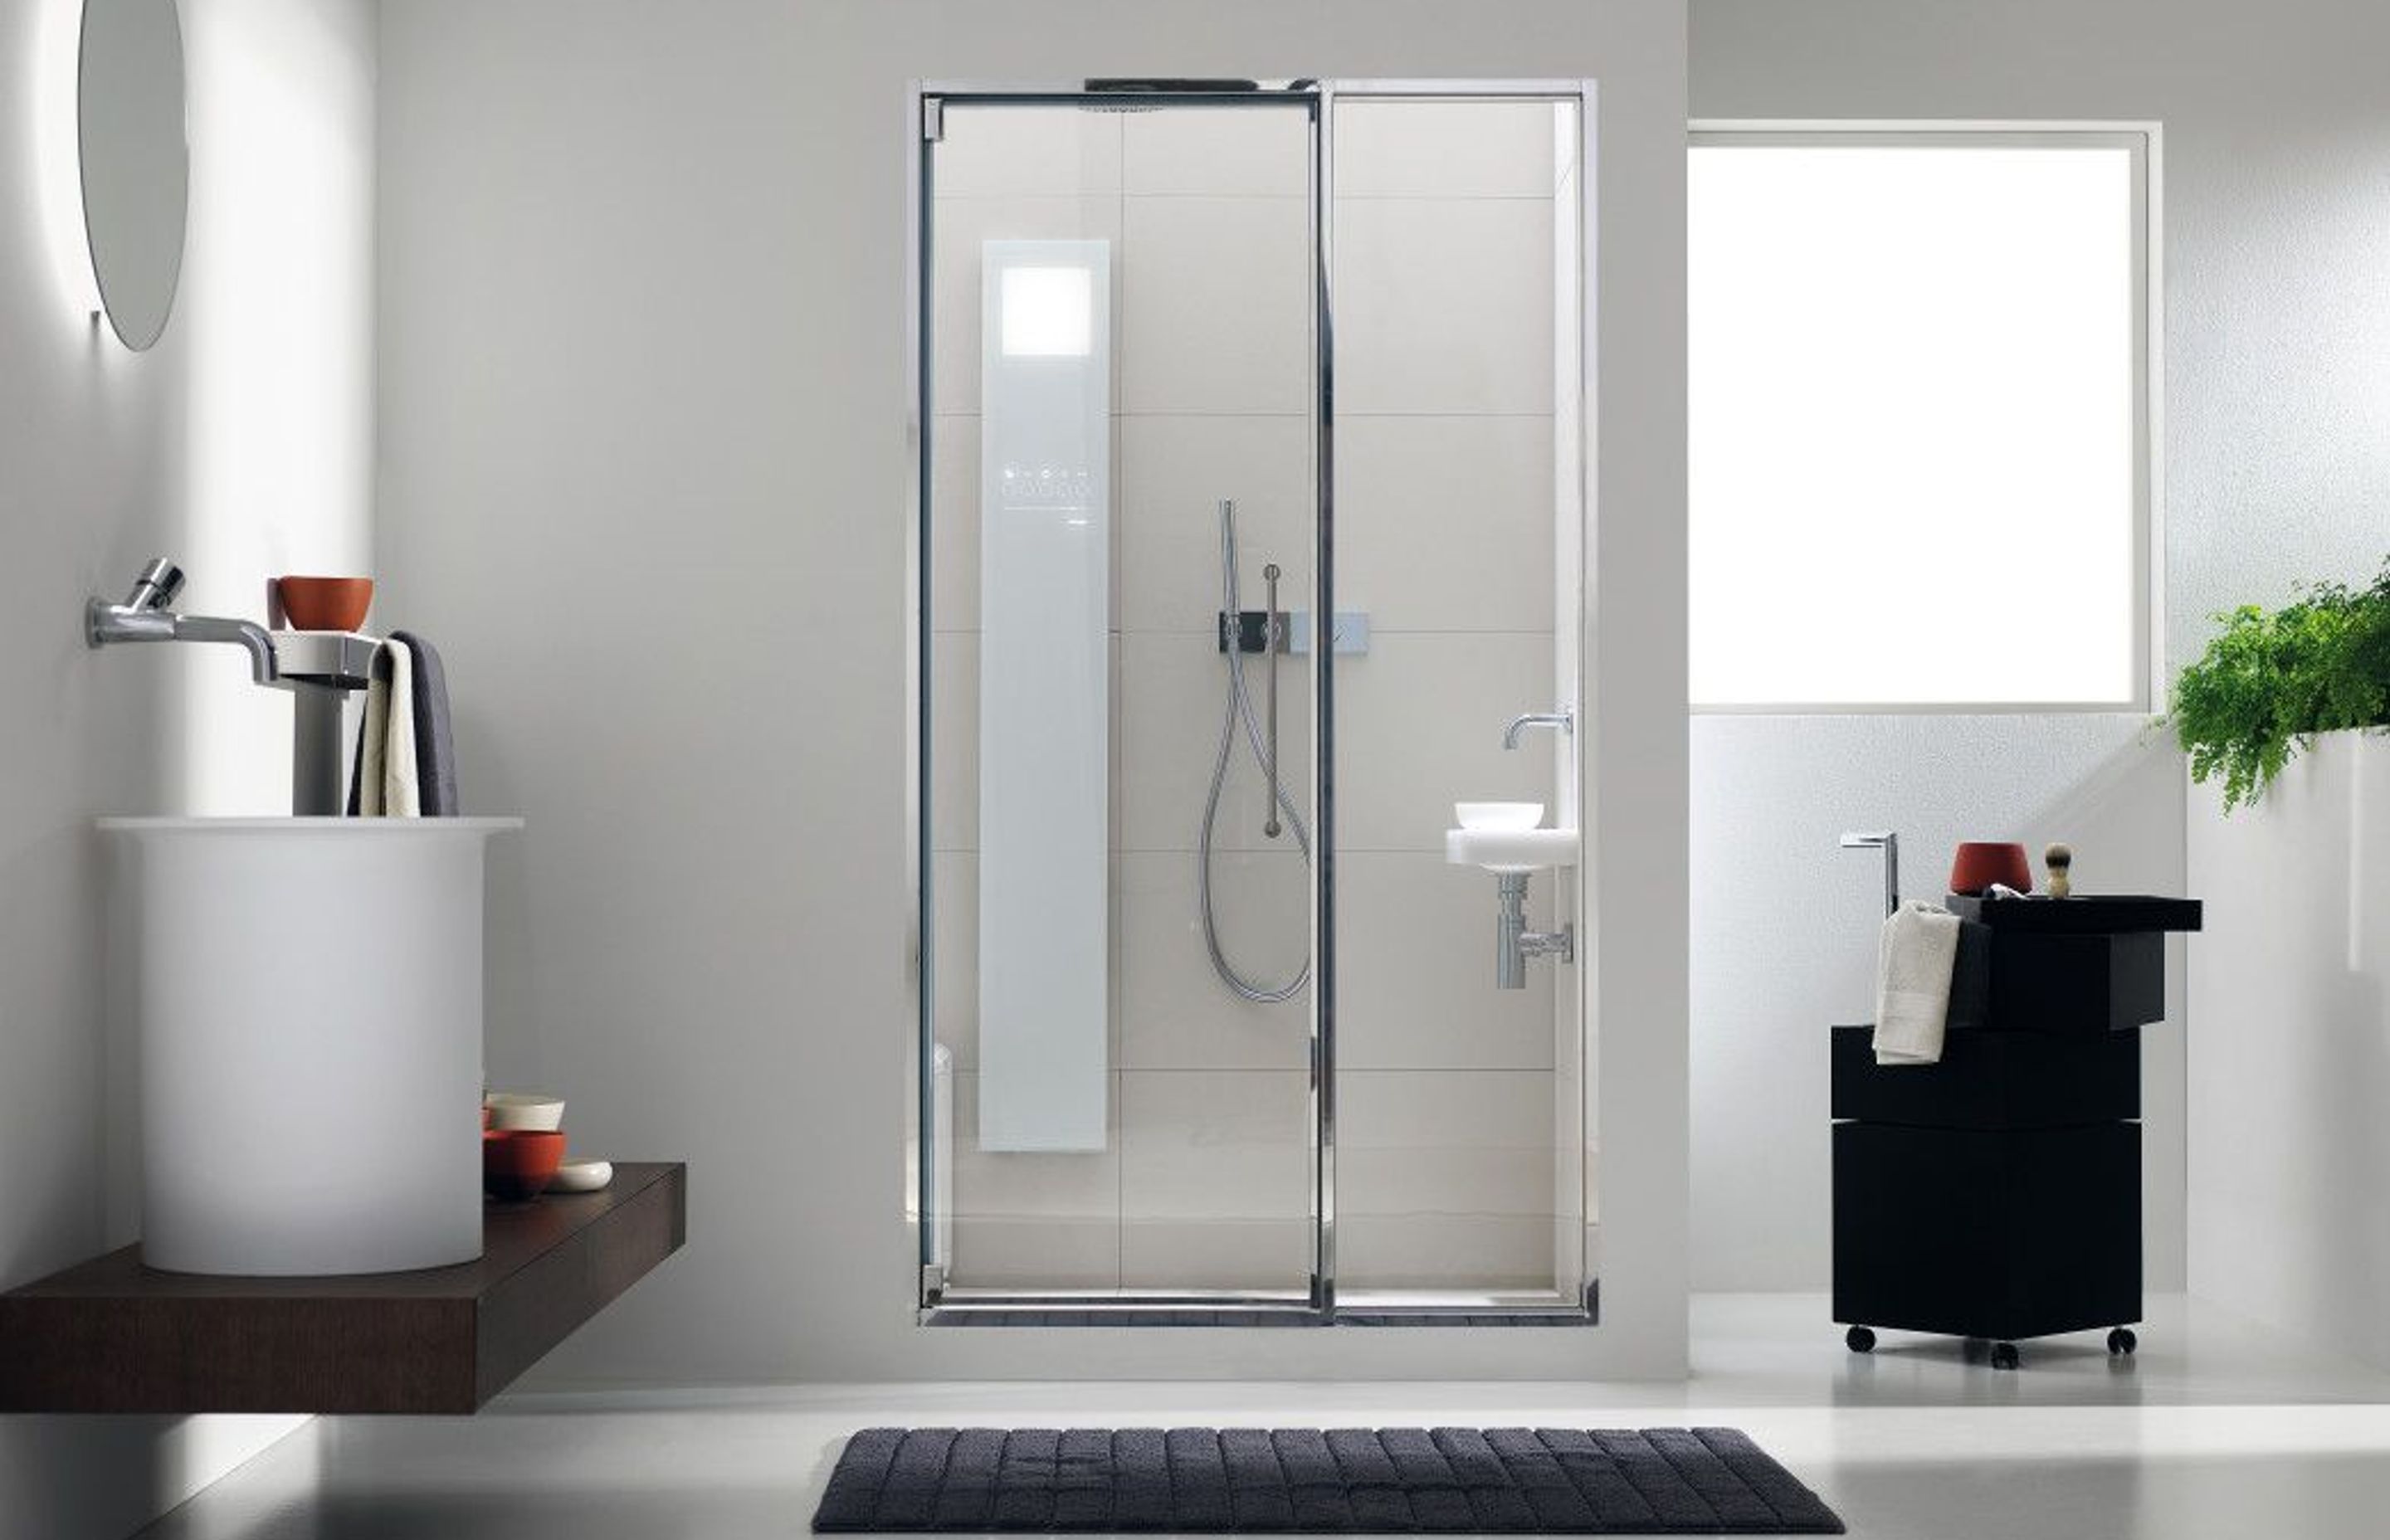 Touch&amp;Steam is a stylish, lightweight professional-standard steam generator that can be fitted to any shower or hammam environment.